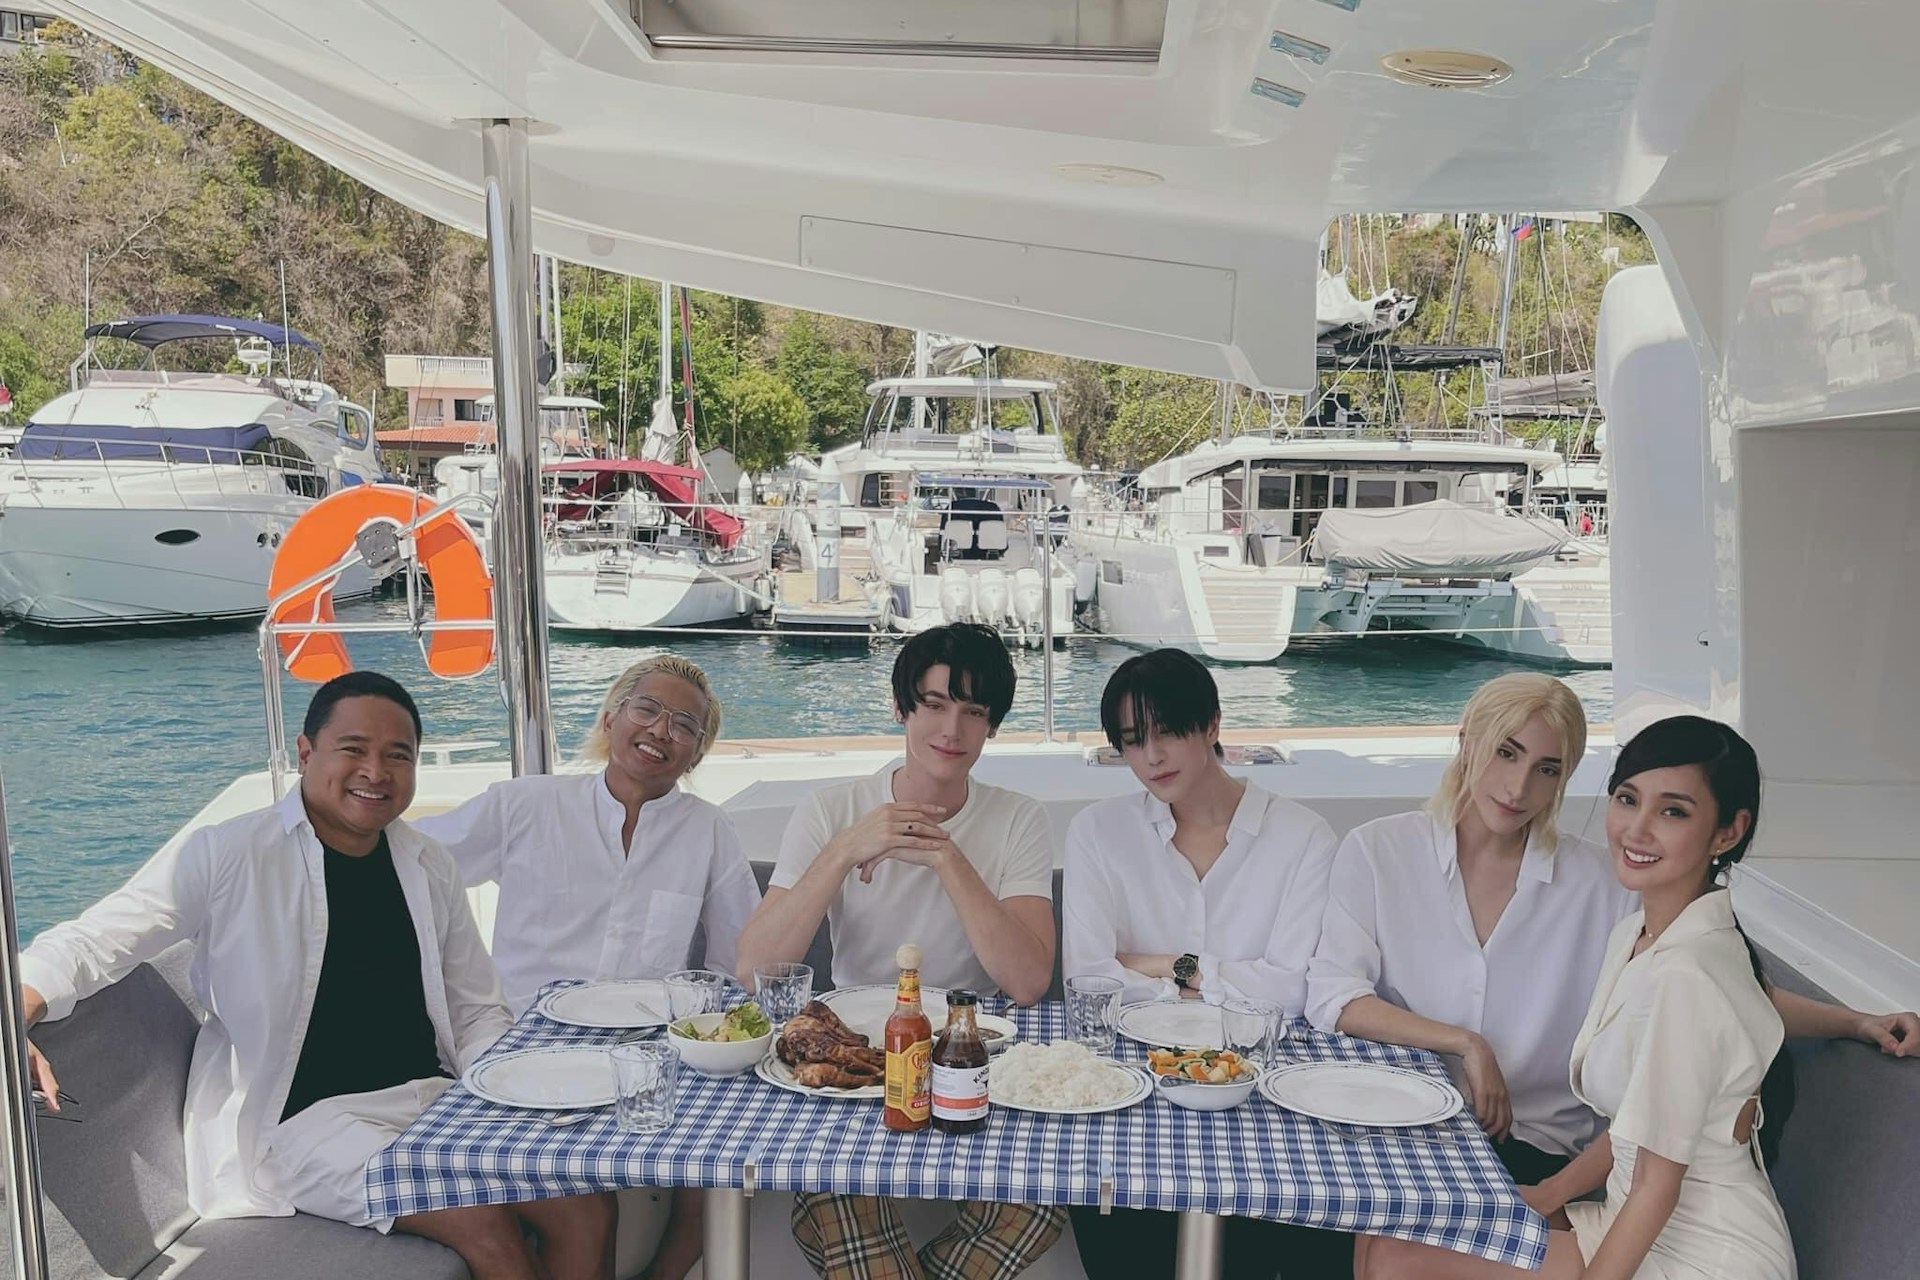 Six individuals, five male and one female sitting in a yacht smiling and taking a picture